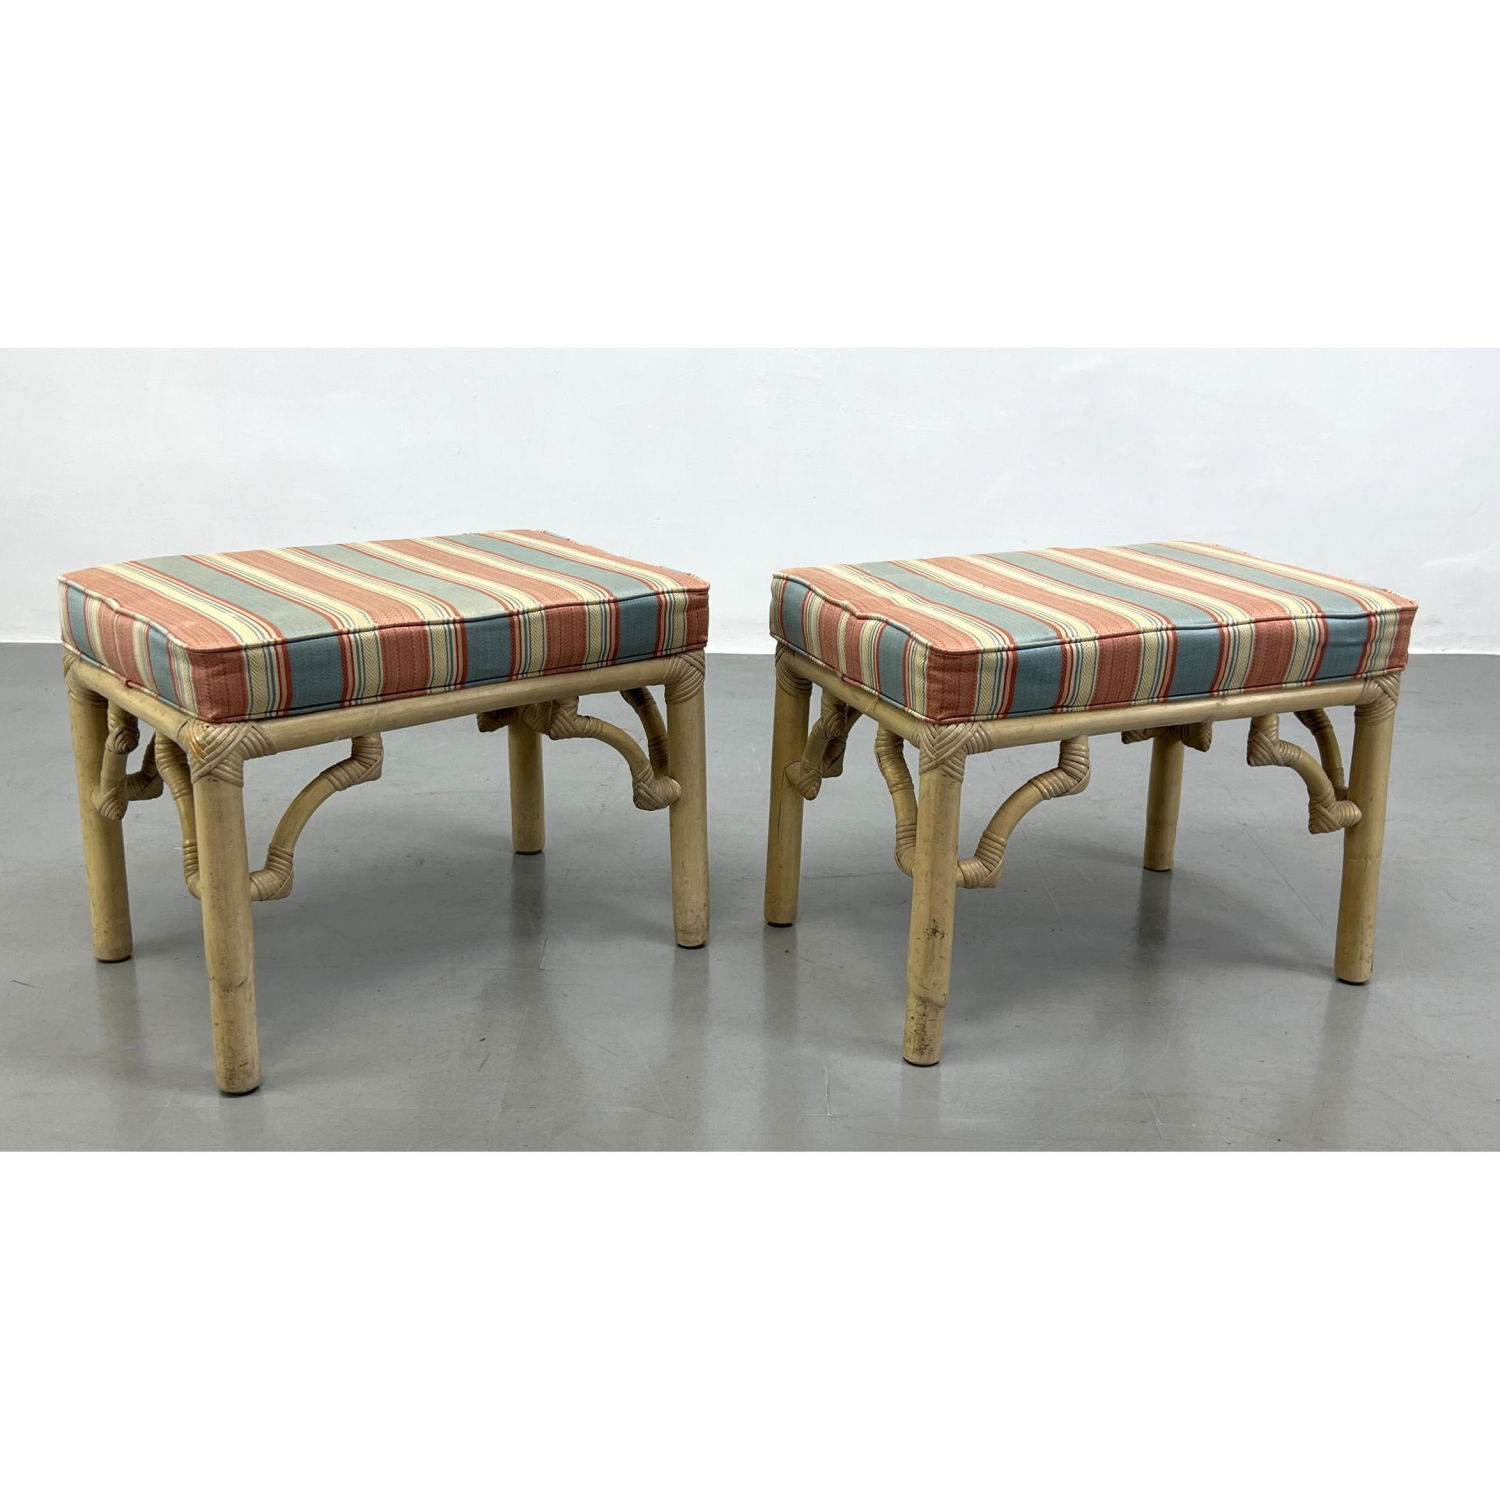 Pr Asian style Bamboo Stools Benches.